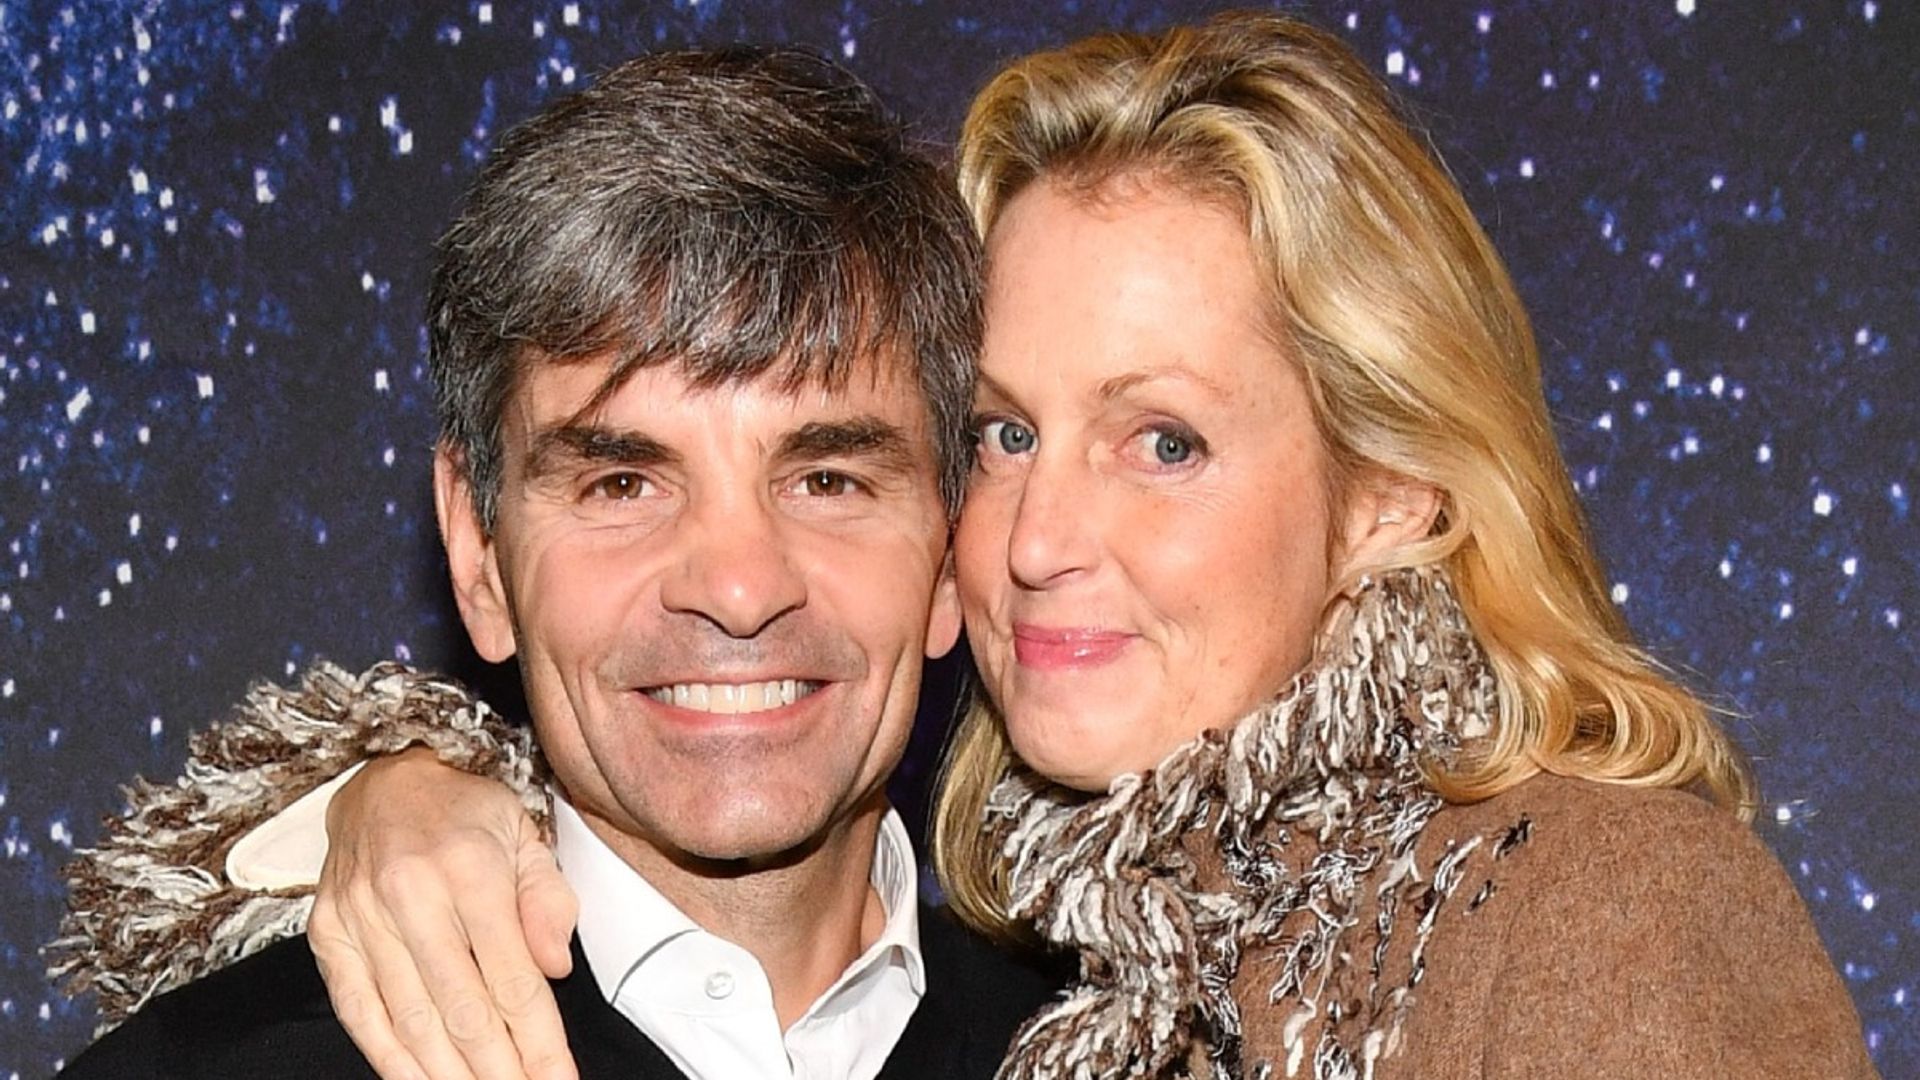 GMA's George Stephanopoulos' wife Ali Wentworth opens up about her anxiety in home video